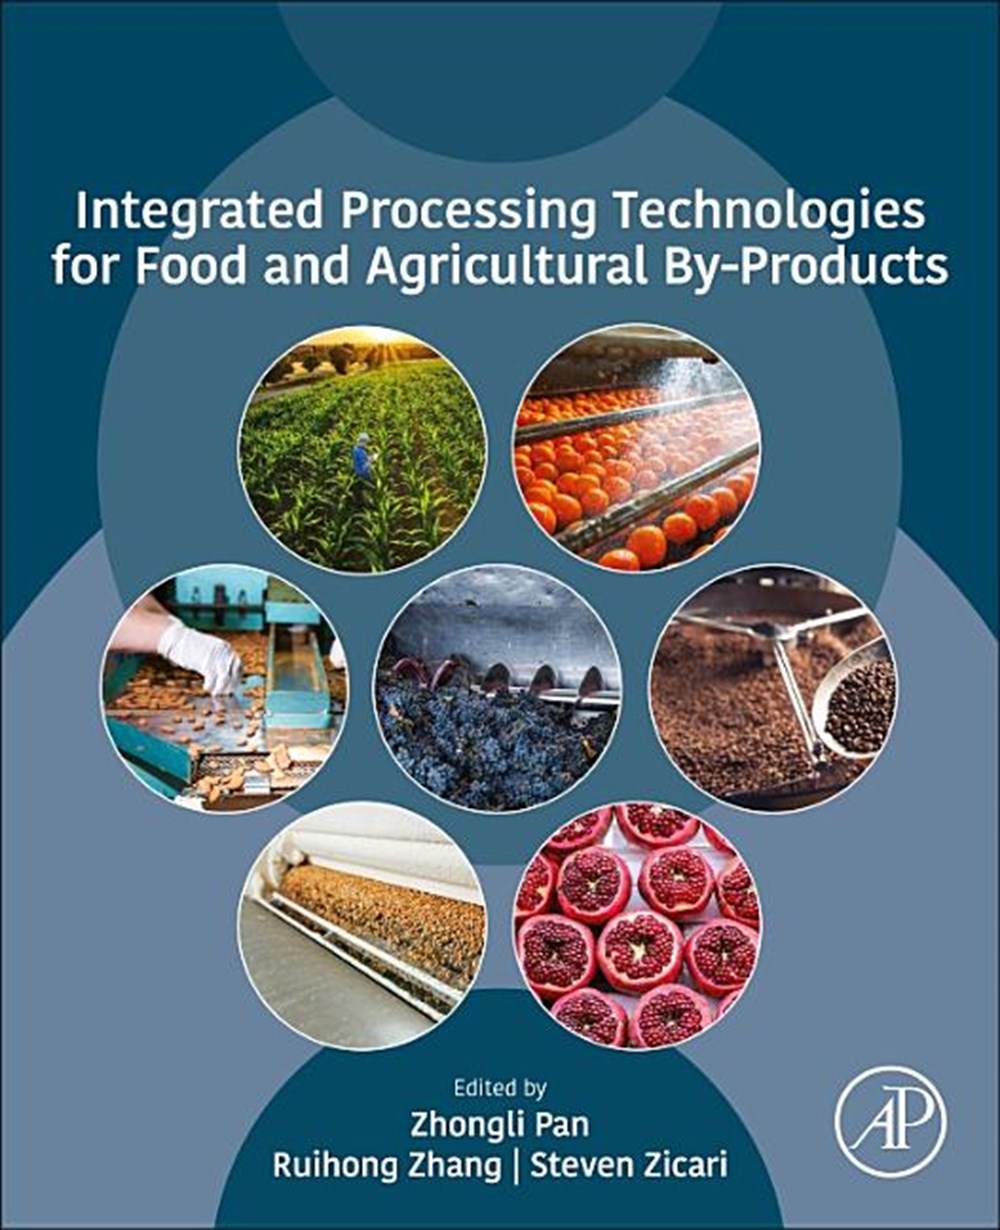 Integrated Processing Technologies for Food and Agricultural By-Products